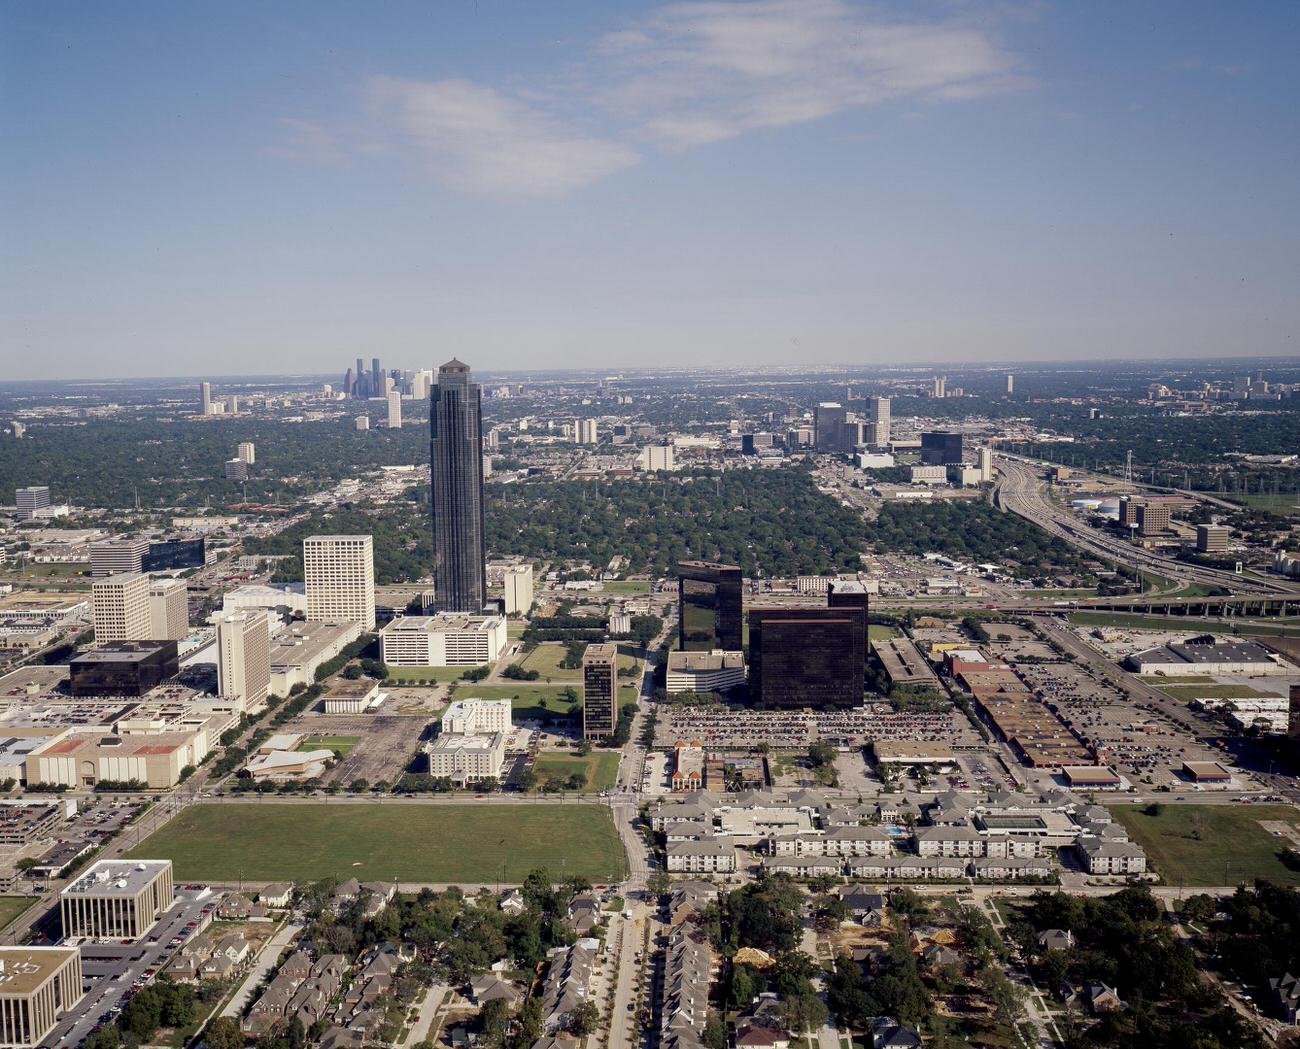 Aerial view of Transco Tower (Williams Tower) with Houston skyline in the background, 1990s